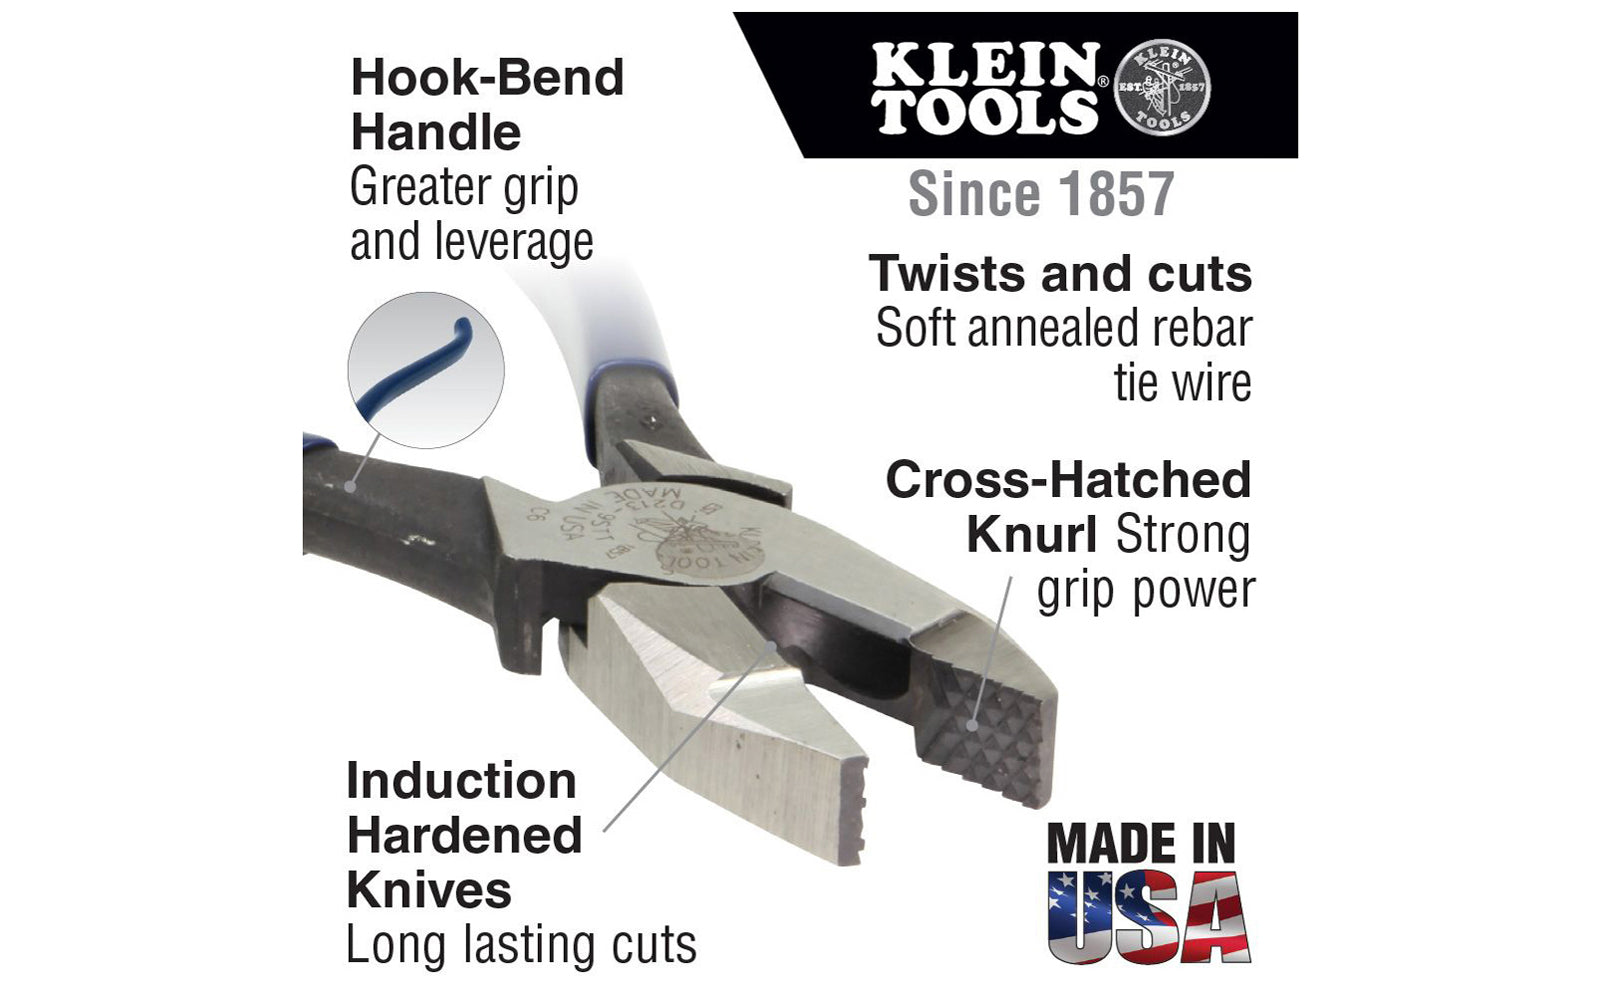 Klein Tools 9" Ironworker's Pliers D201-7CST twist & cut soft annealed rebar tie wire. They feature knurled jaws for a good grip & a spring-loaded design which enables self-opening. Unique handle tempering helps absorb the ''snap'' when cutting wire. Precision-hardened plier head. 9" overall length. 092644703027